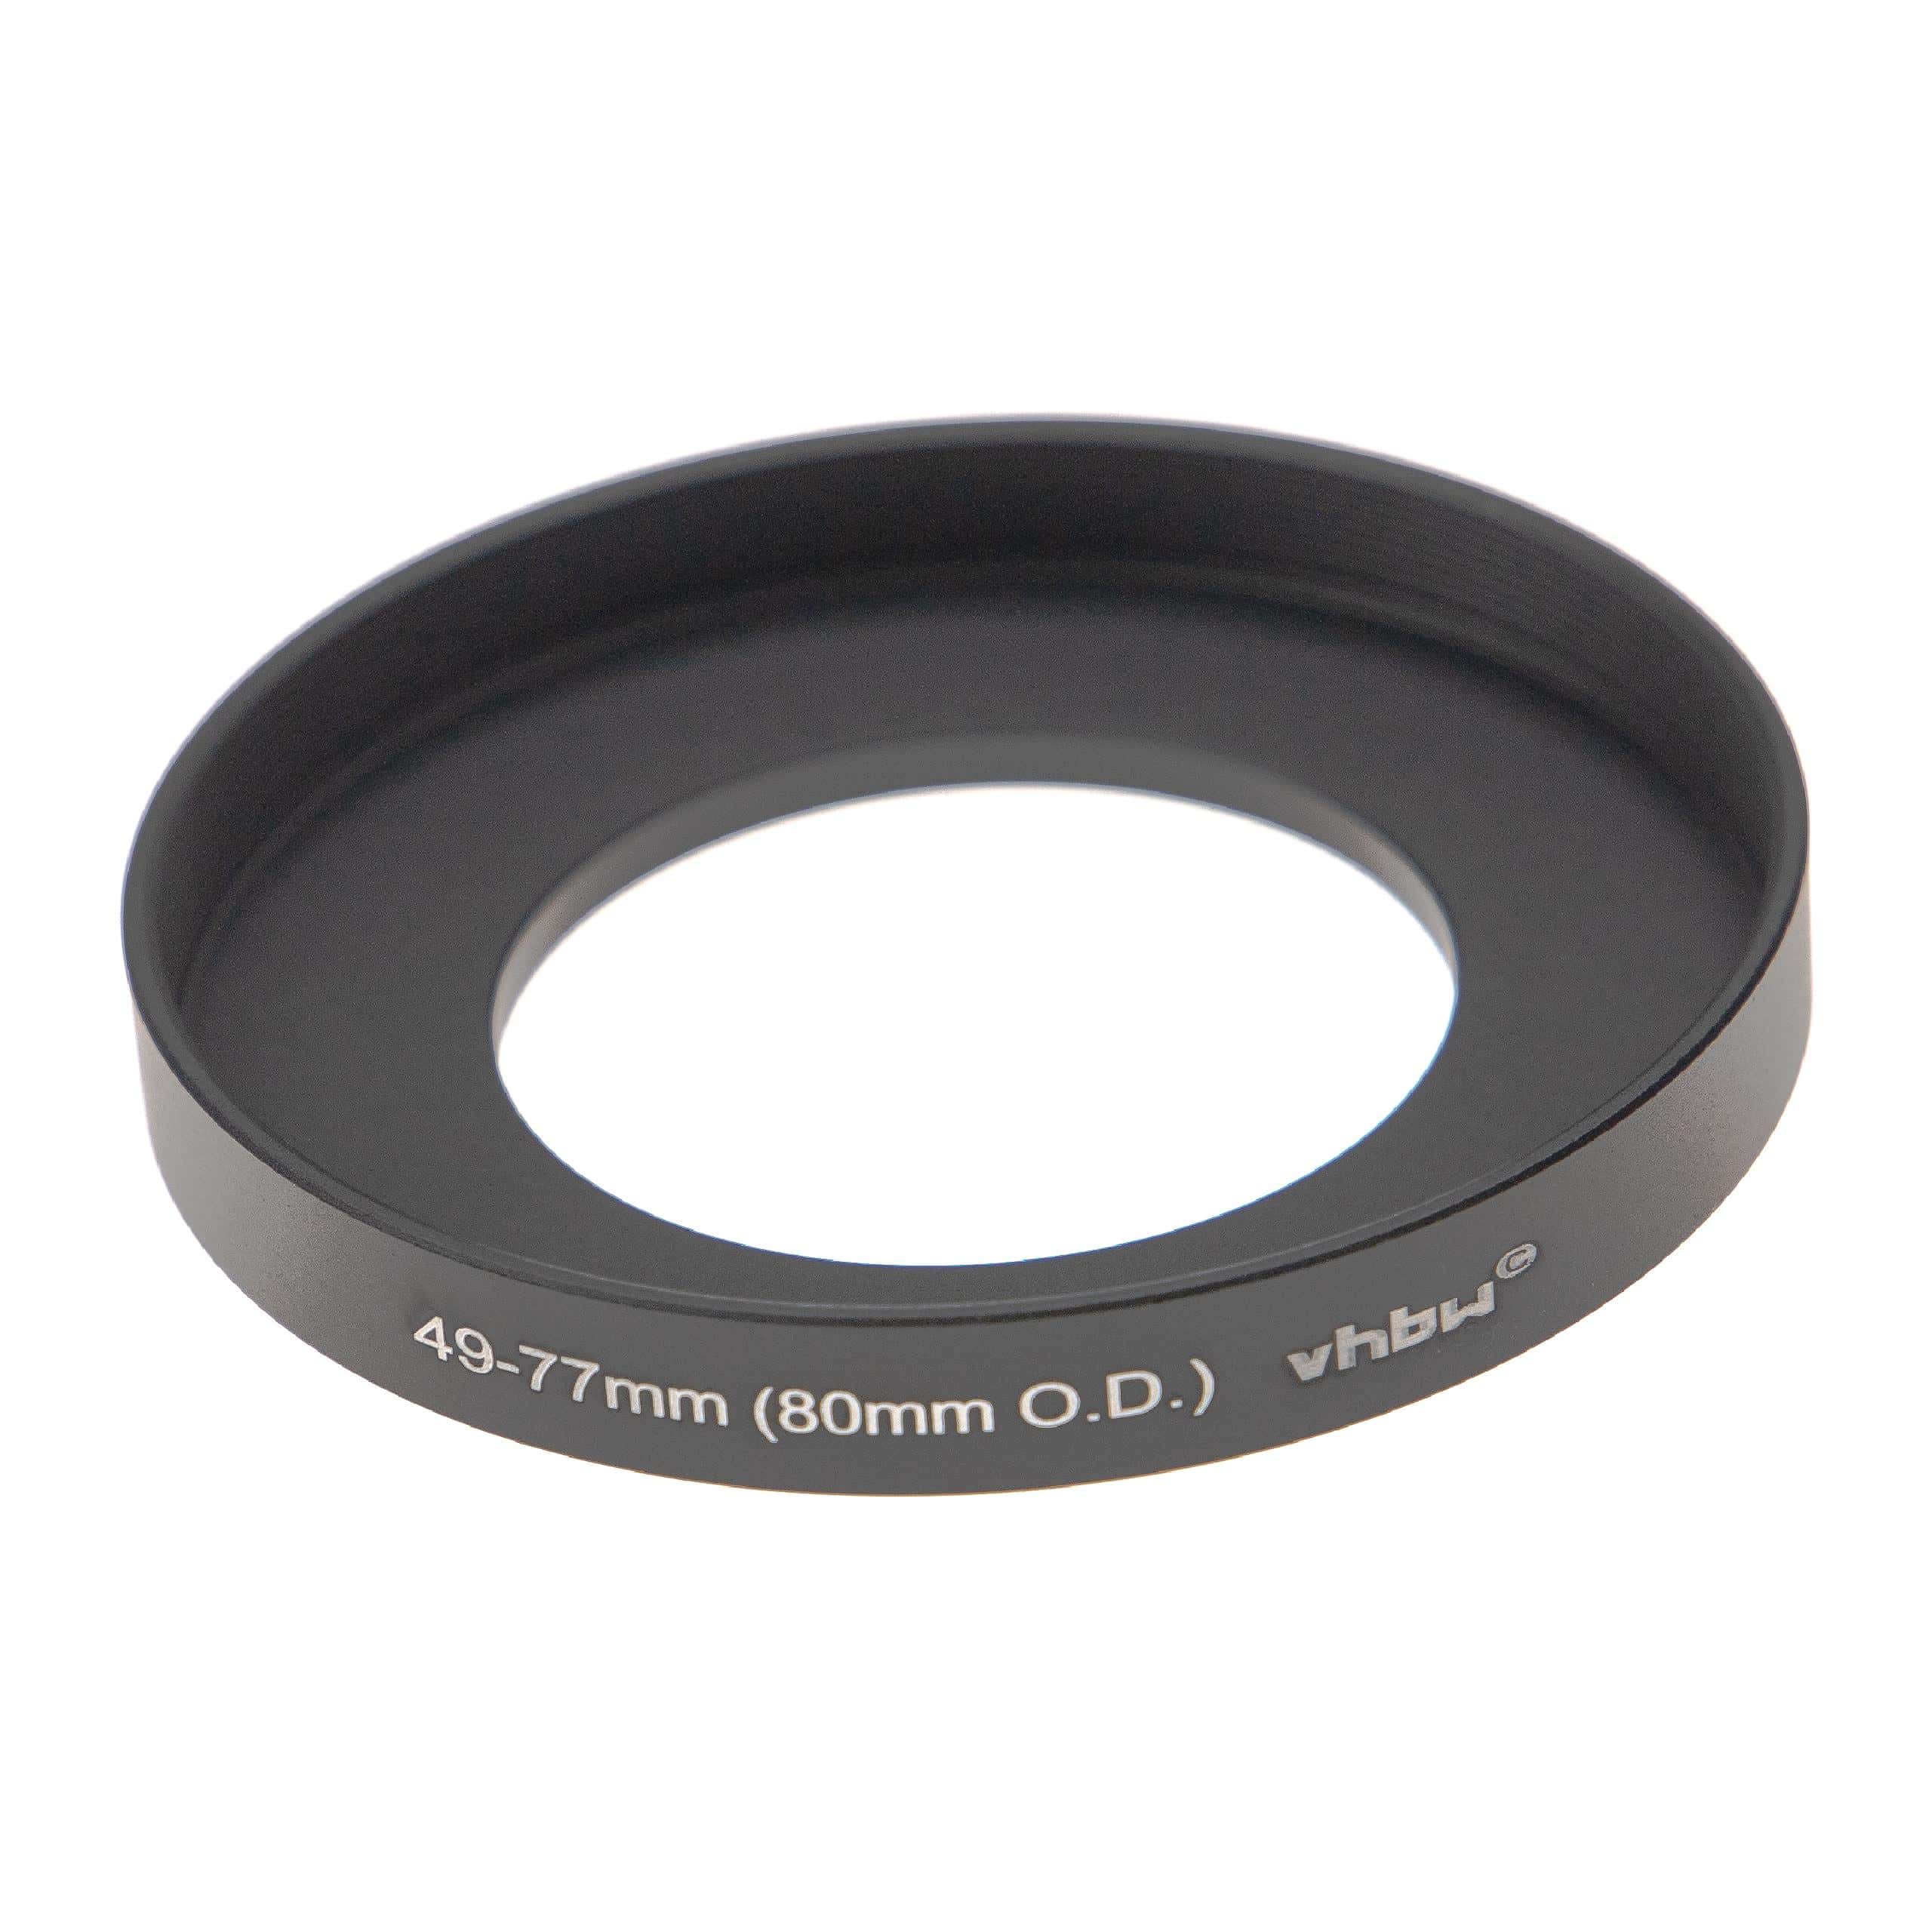 Step-Up Ring Adapter of 49 mm to 77 mm for matte box 80 mm O.D. - Filter Adapter